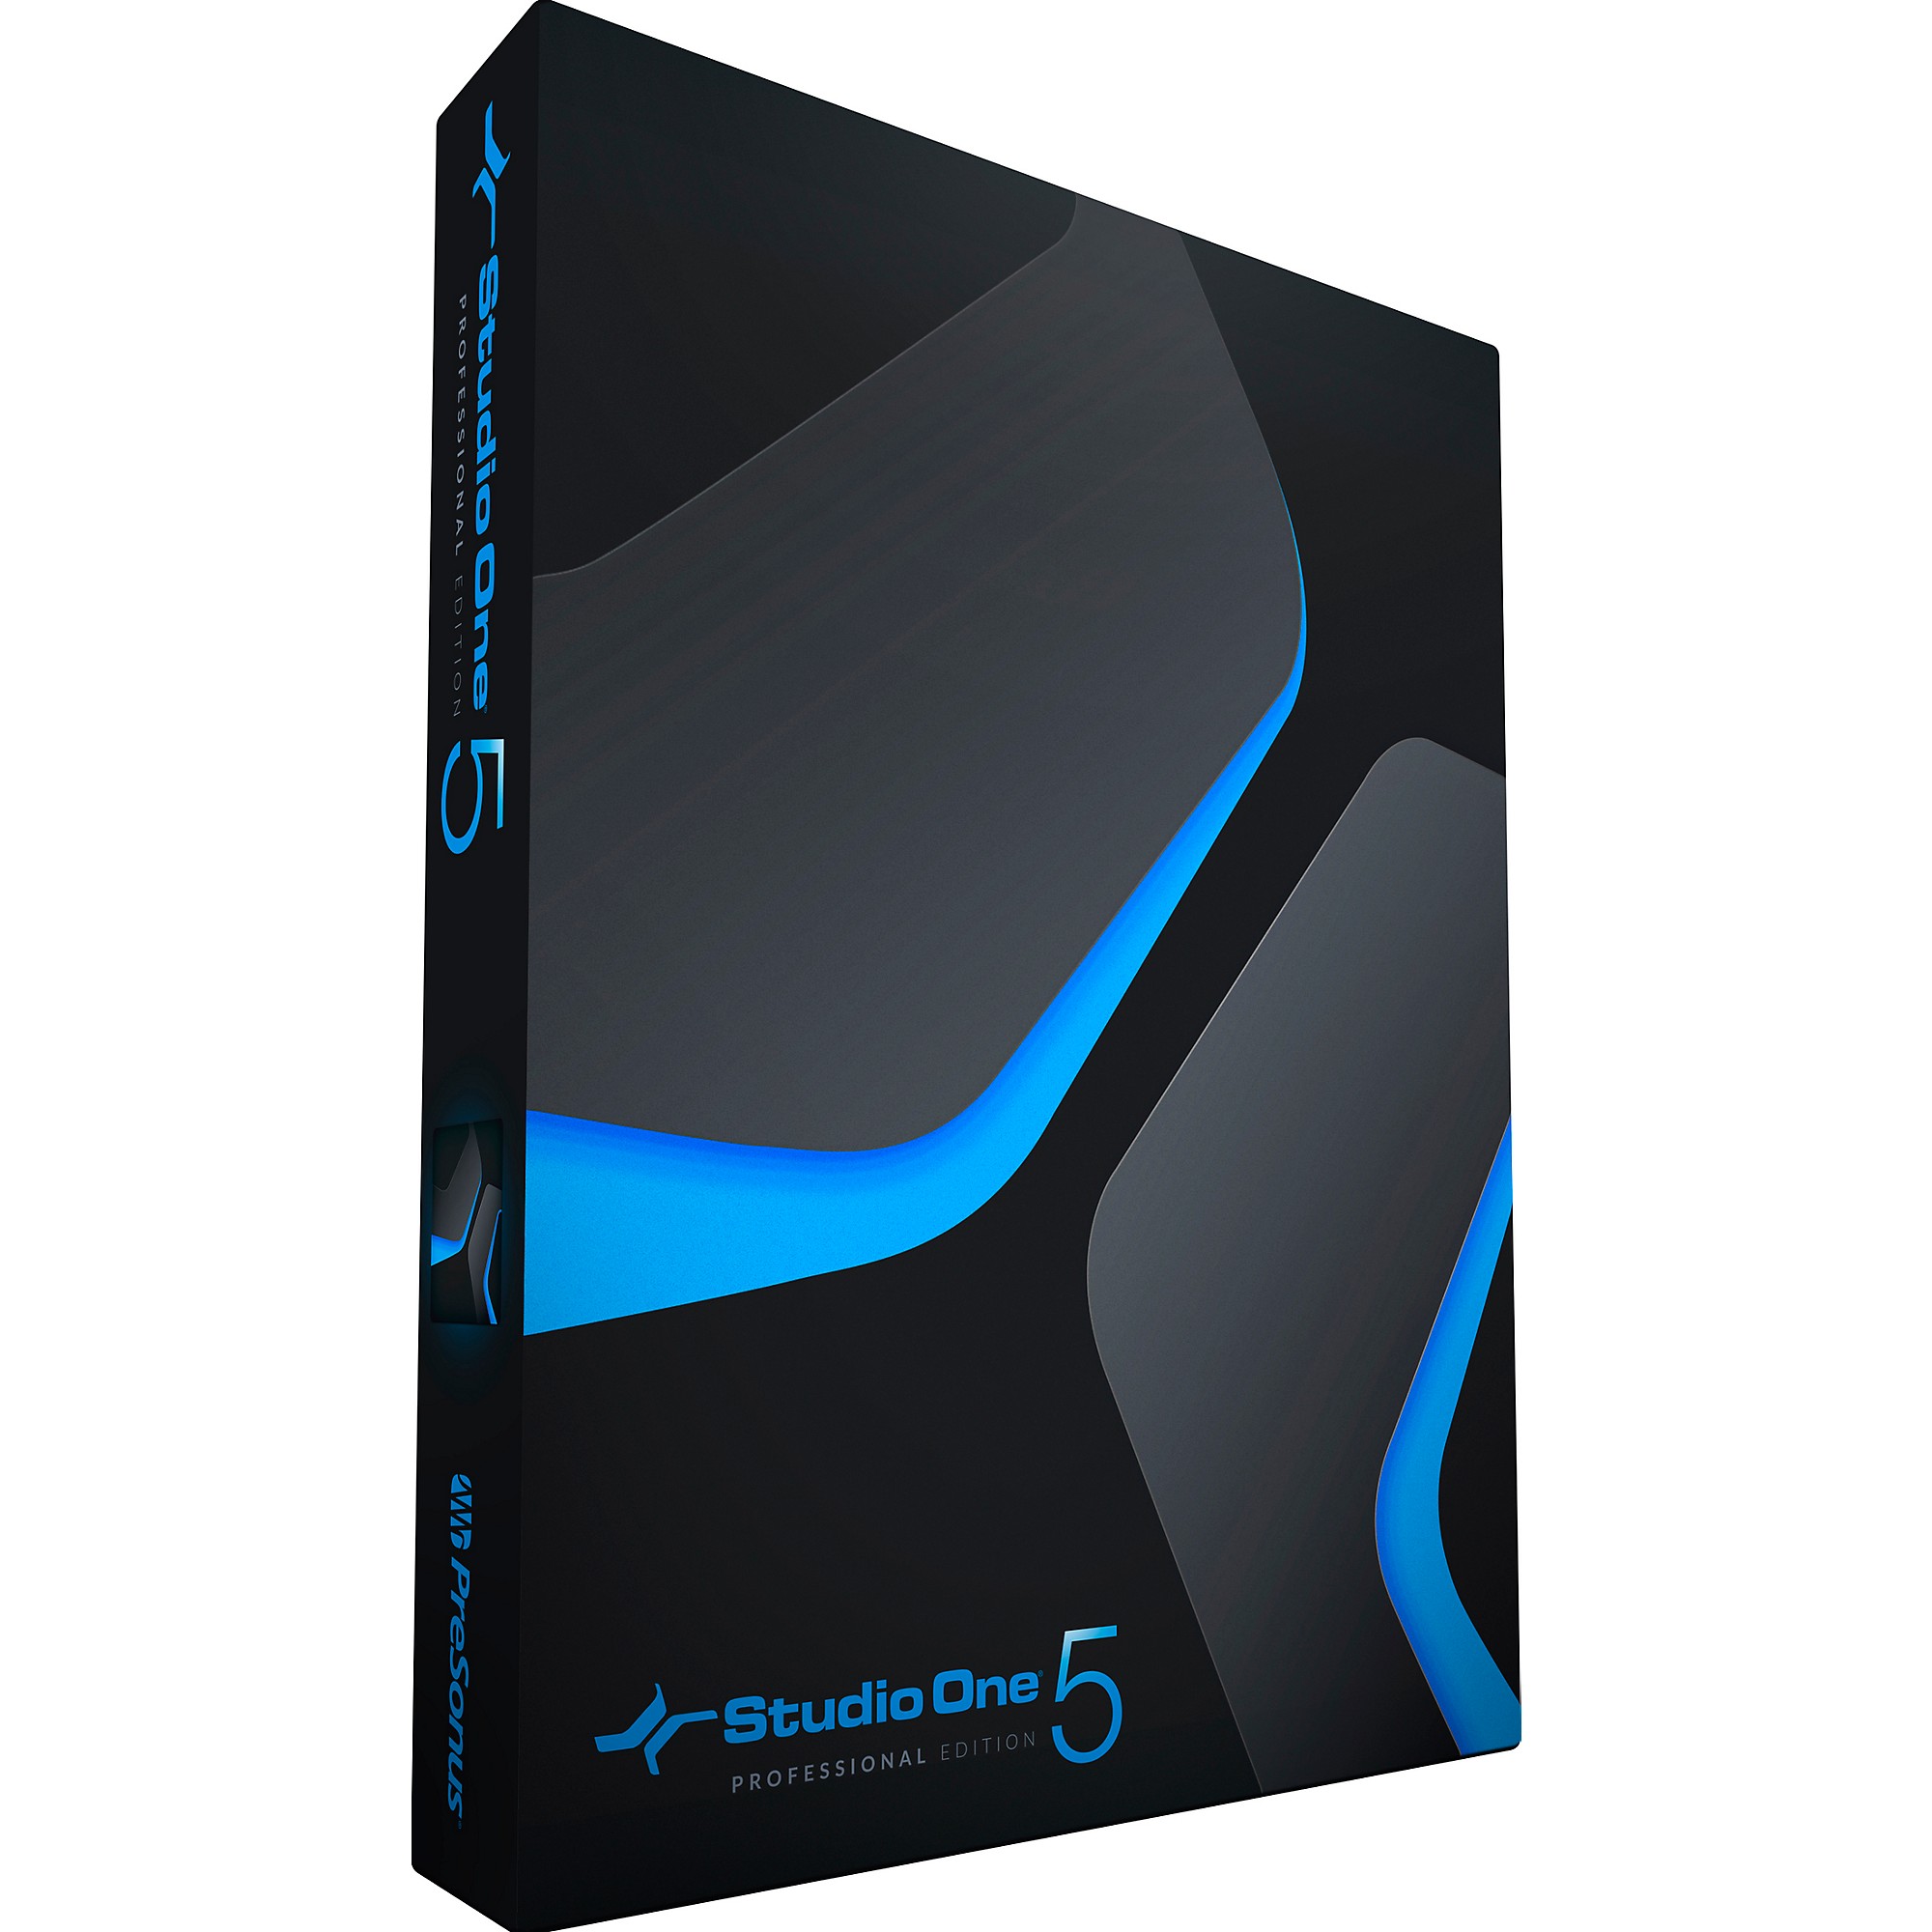 studio one software free download for windows 7